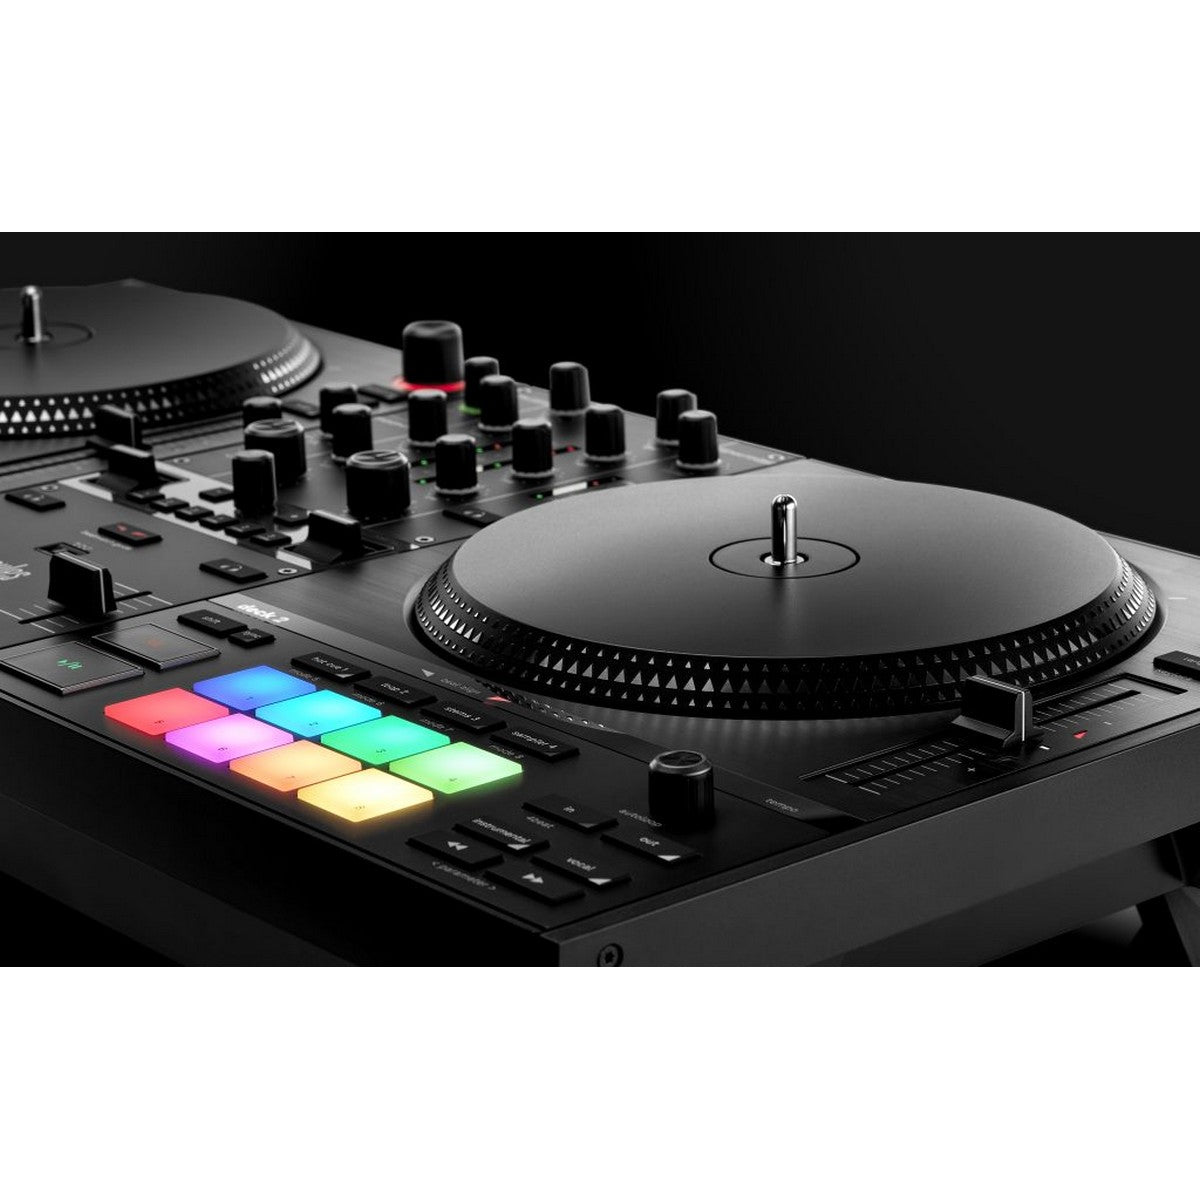 Hercules DJControl Inpulse T7 2-Channel DJ Controller for Serato and Djuced